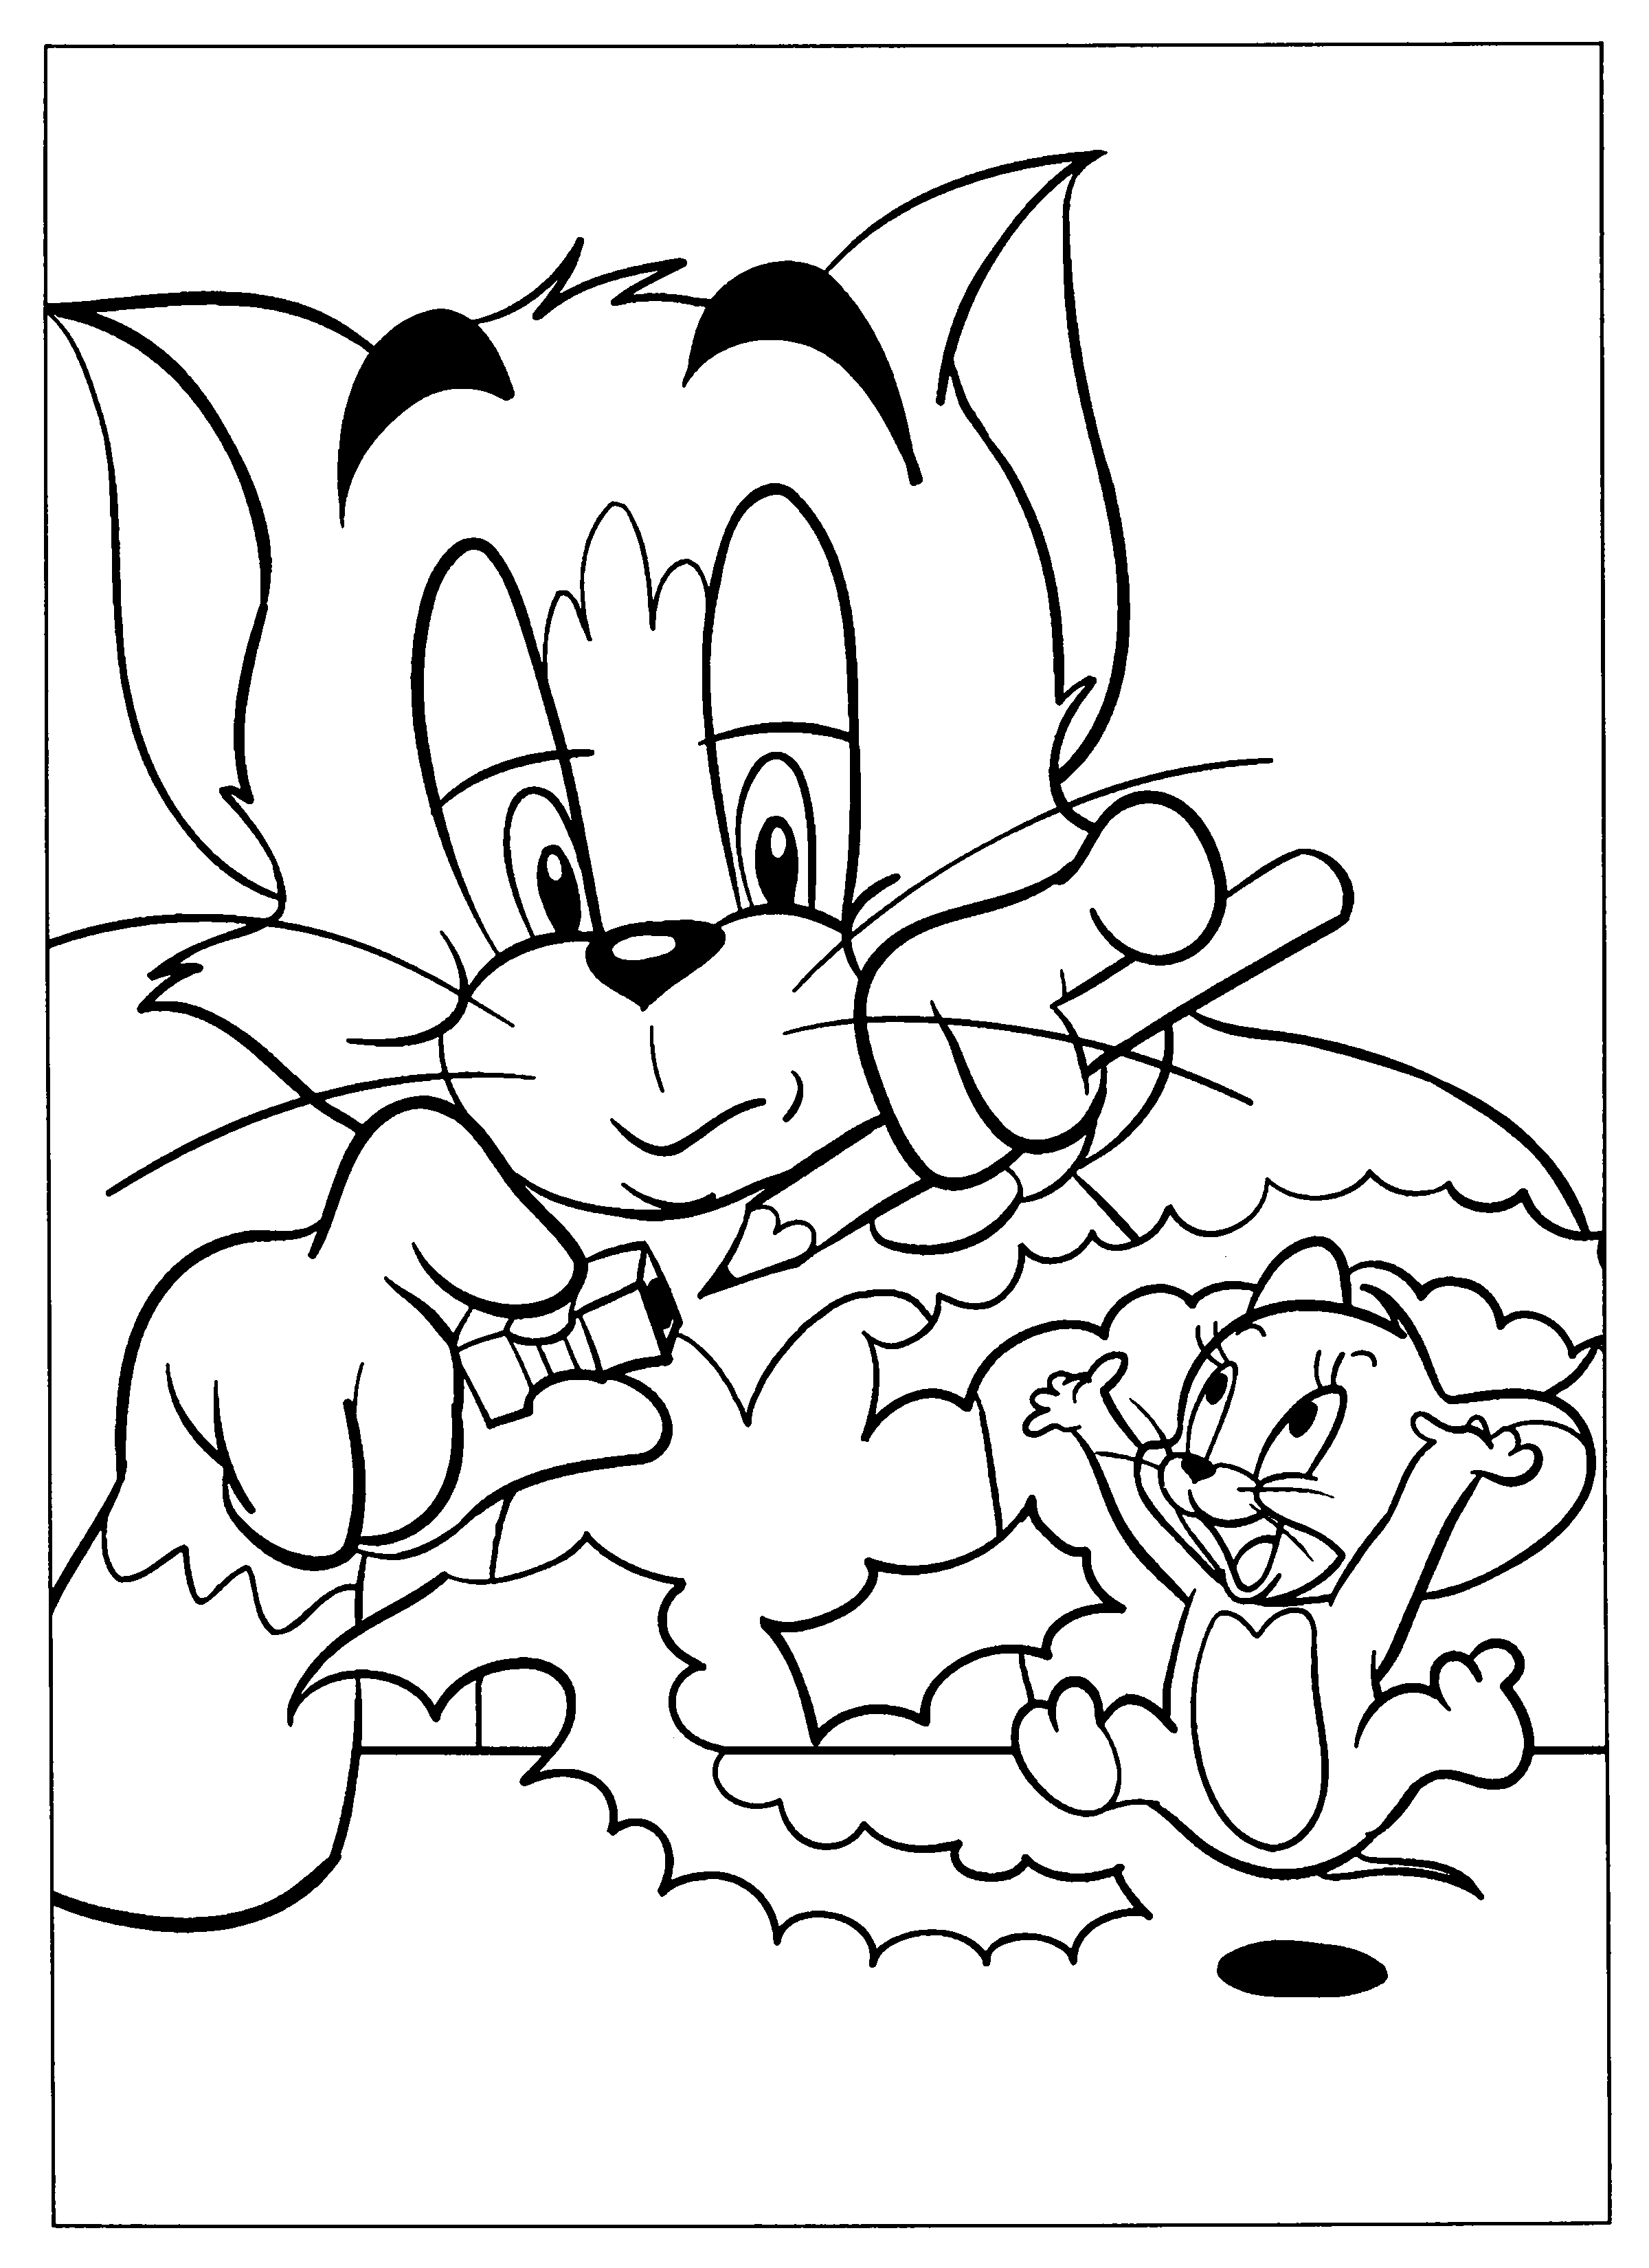 Tom and jerry Coloring Pages